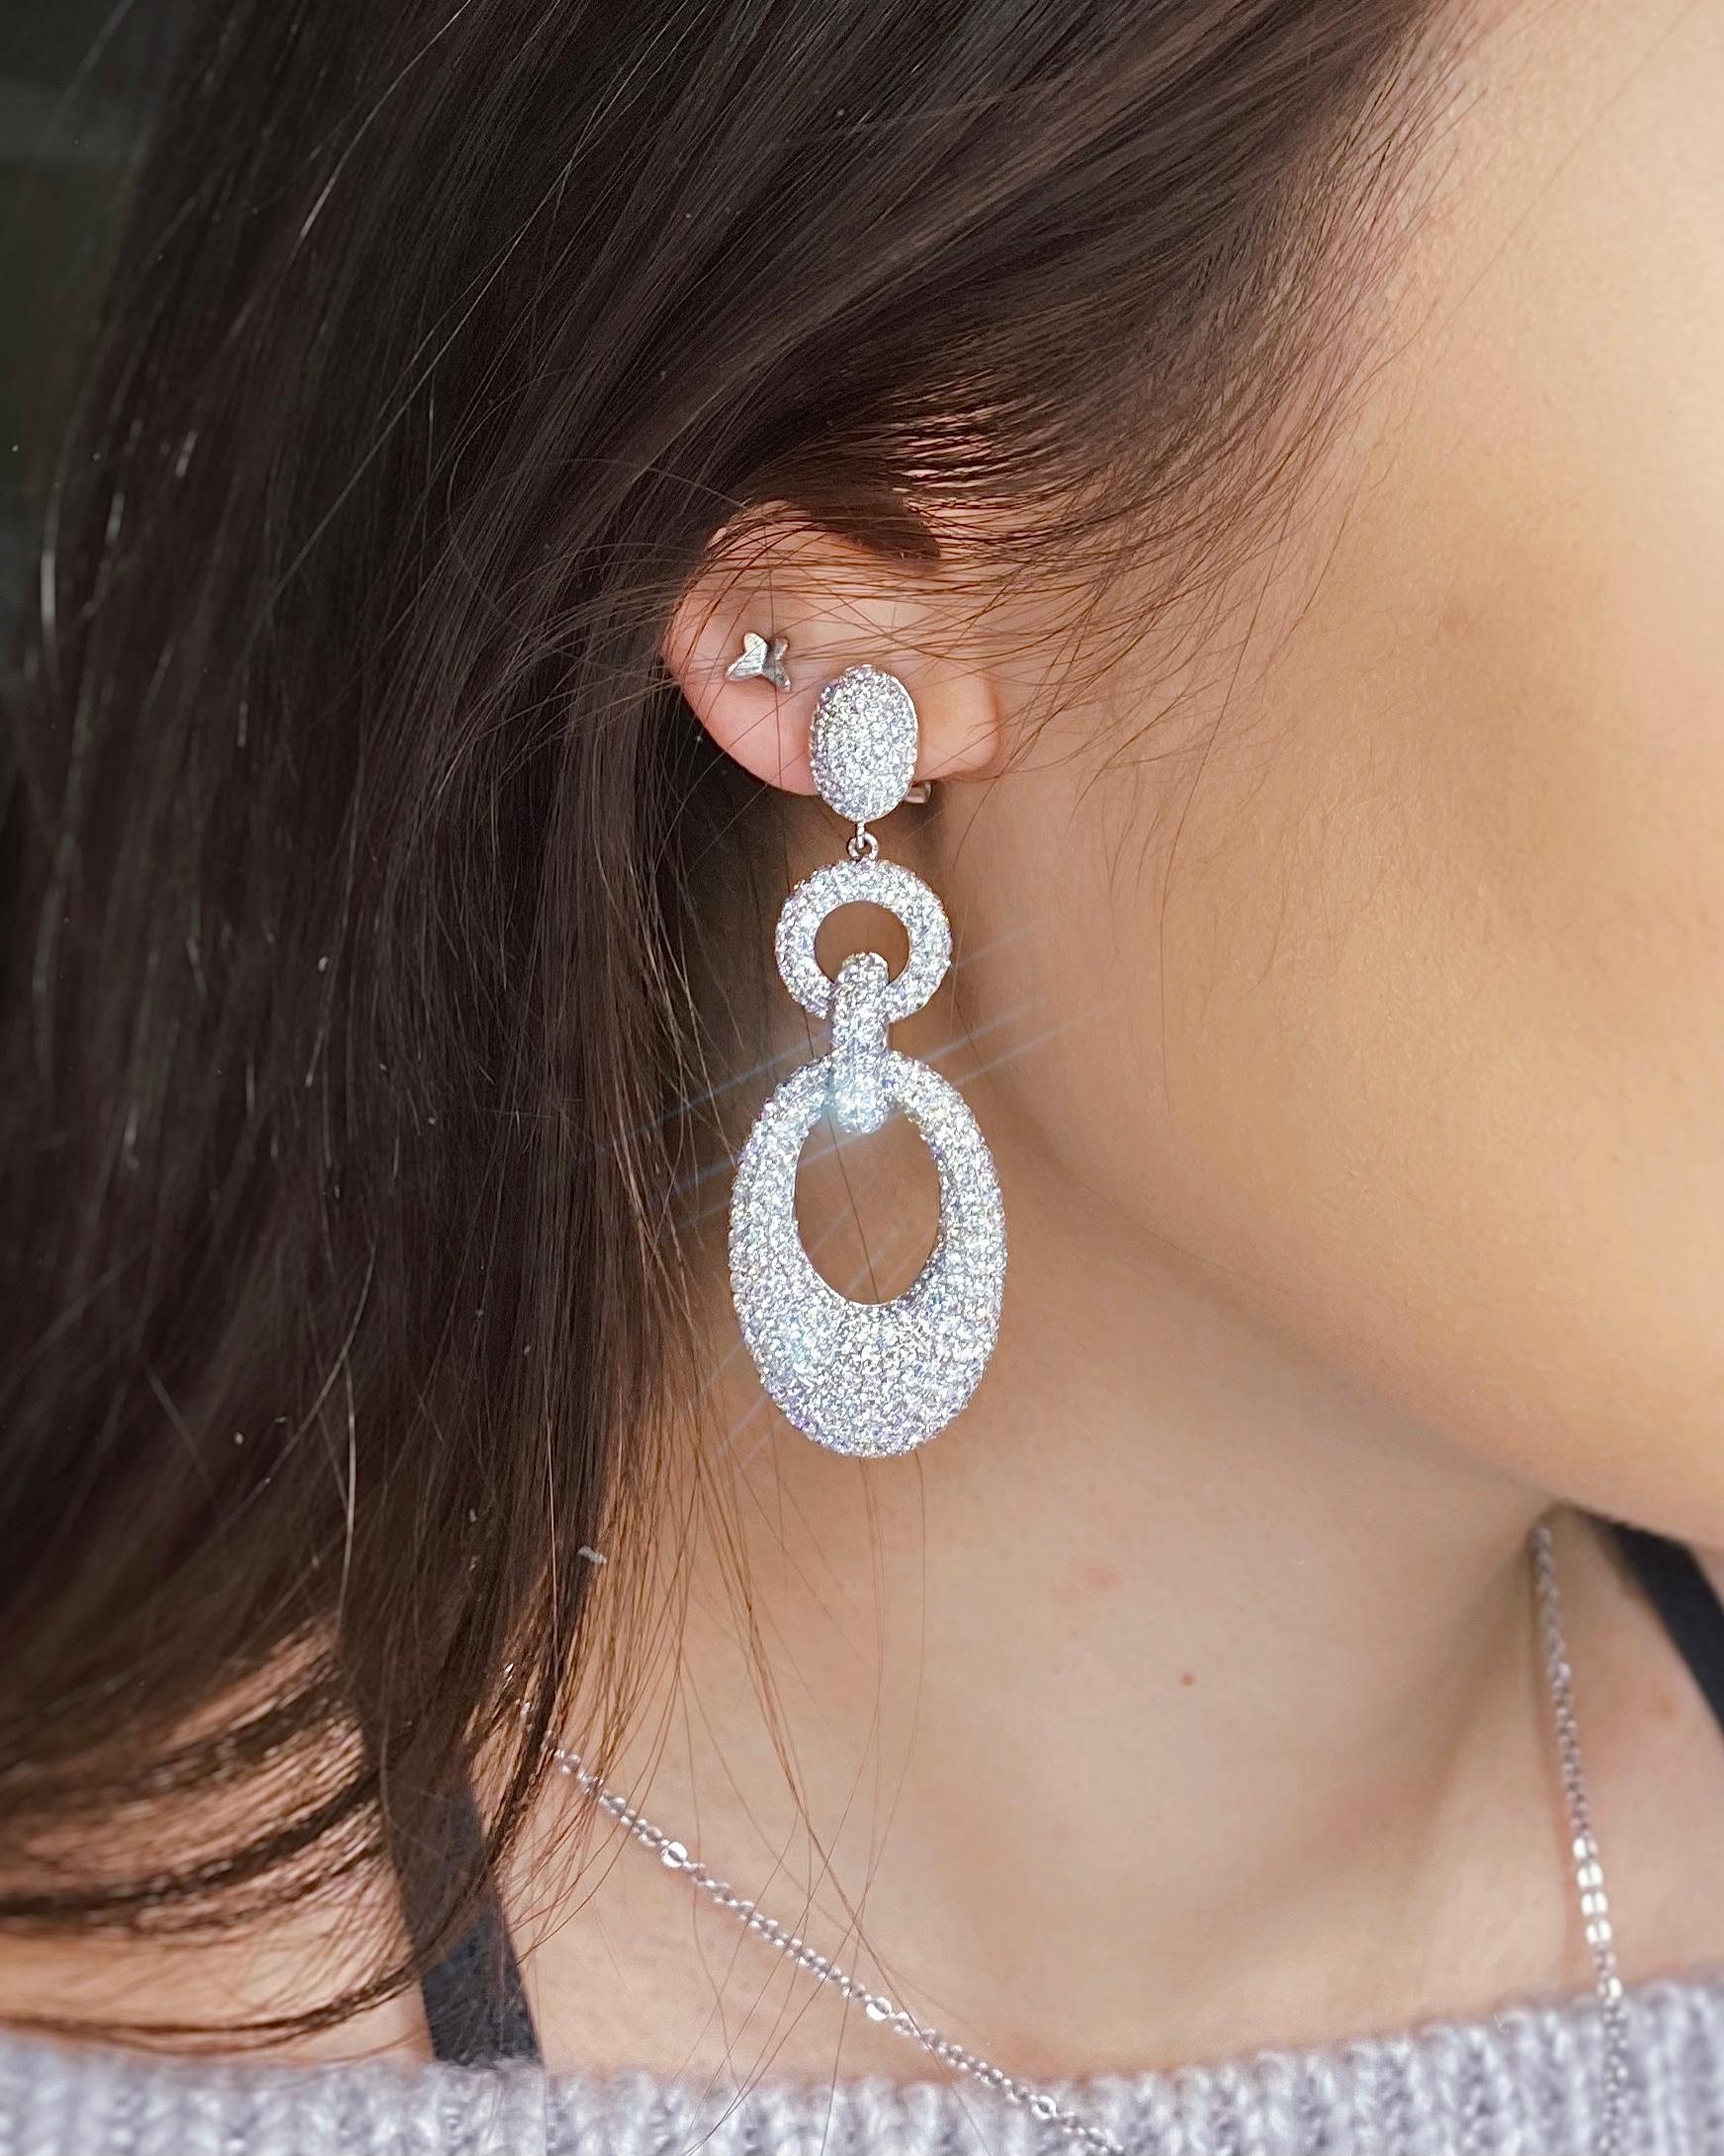 Total carat: 14CT
Metal: 18 K White Gold
Length : 52 mm
Stone Clarity: (F-G, VS2-SI1)

18k White gold 14CT Diamond earrings with micro pave diamonds EAR-179501
Total carat: 14CT
Metal: 18K White Gold
Length : 52 mm
Stone Clarity: (F-G, VS2-SI1)